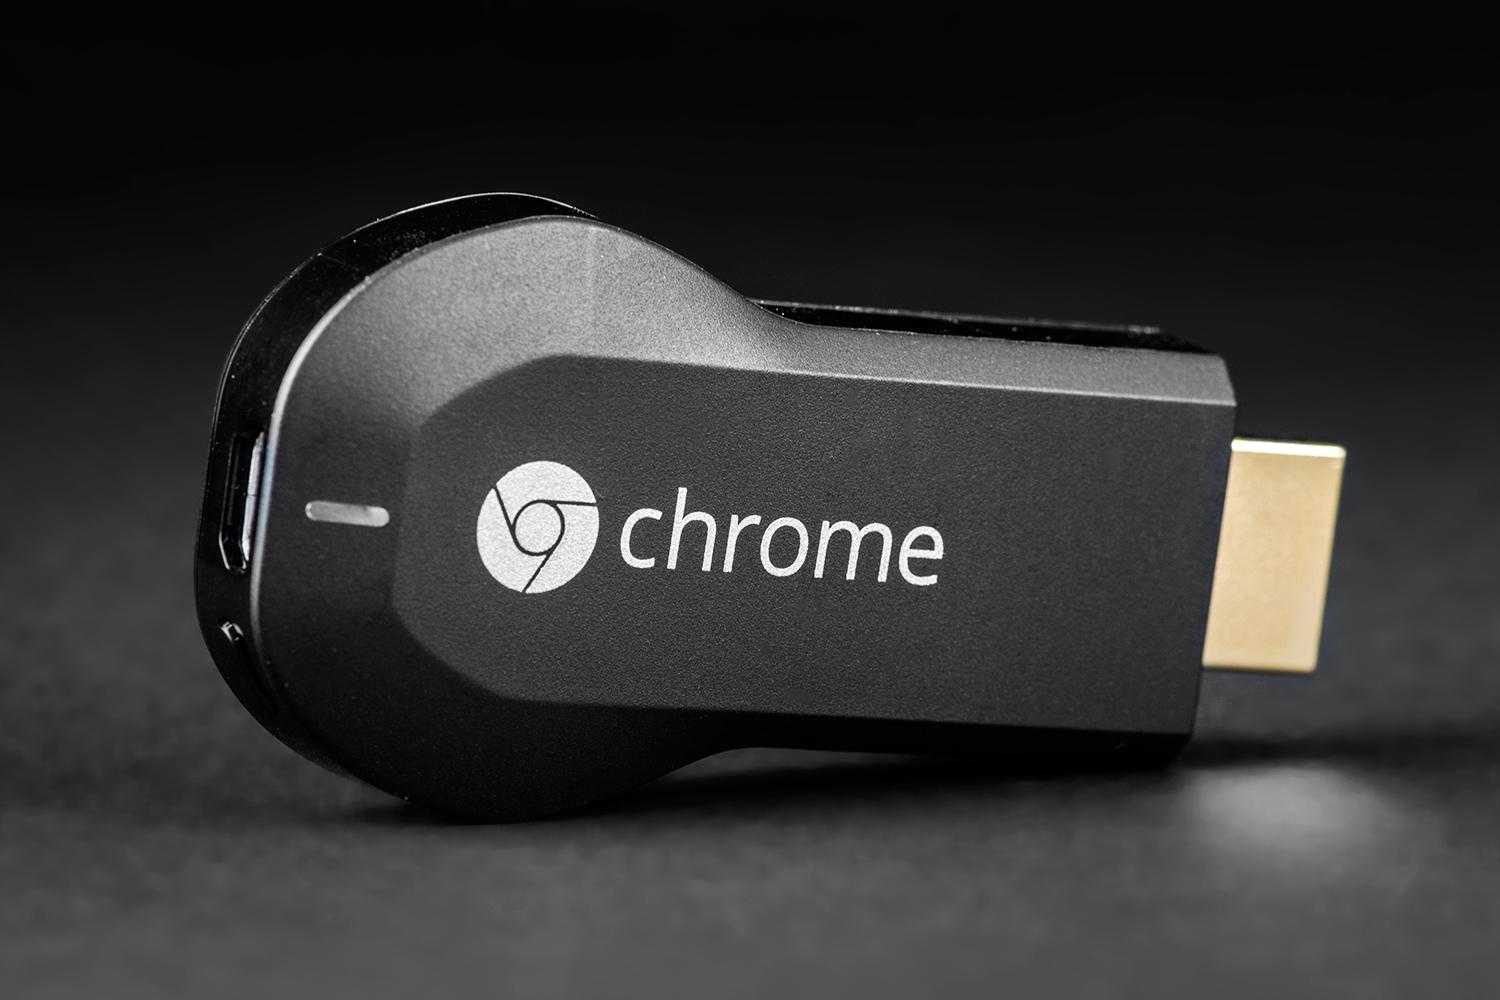 forbedre Flåde katastrofe 6 ways how you can use Chromecast outside the box | Digital Trends